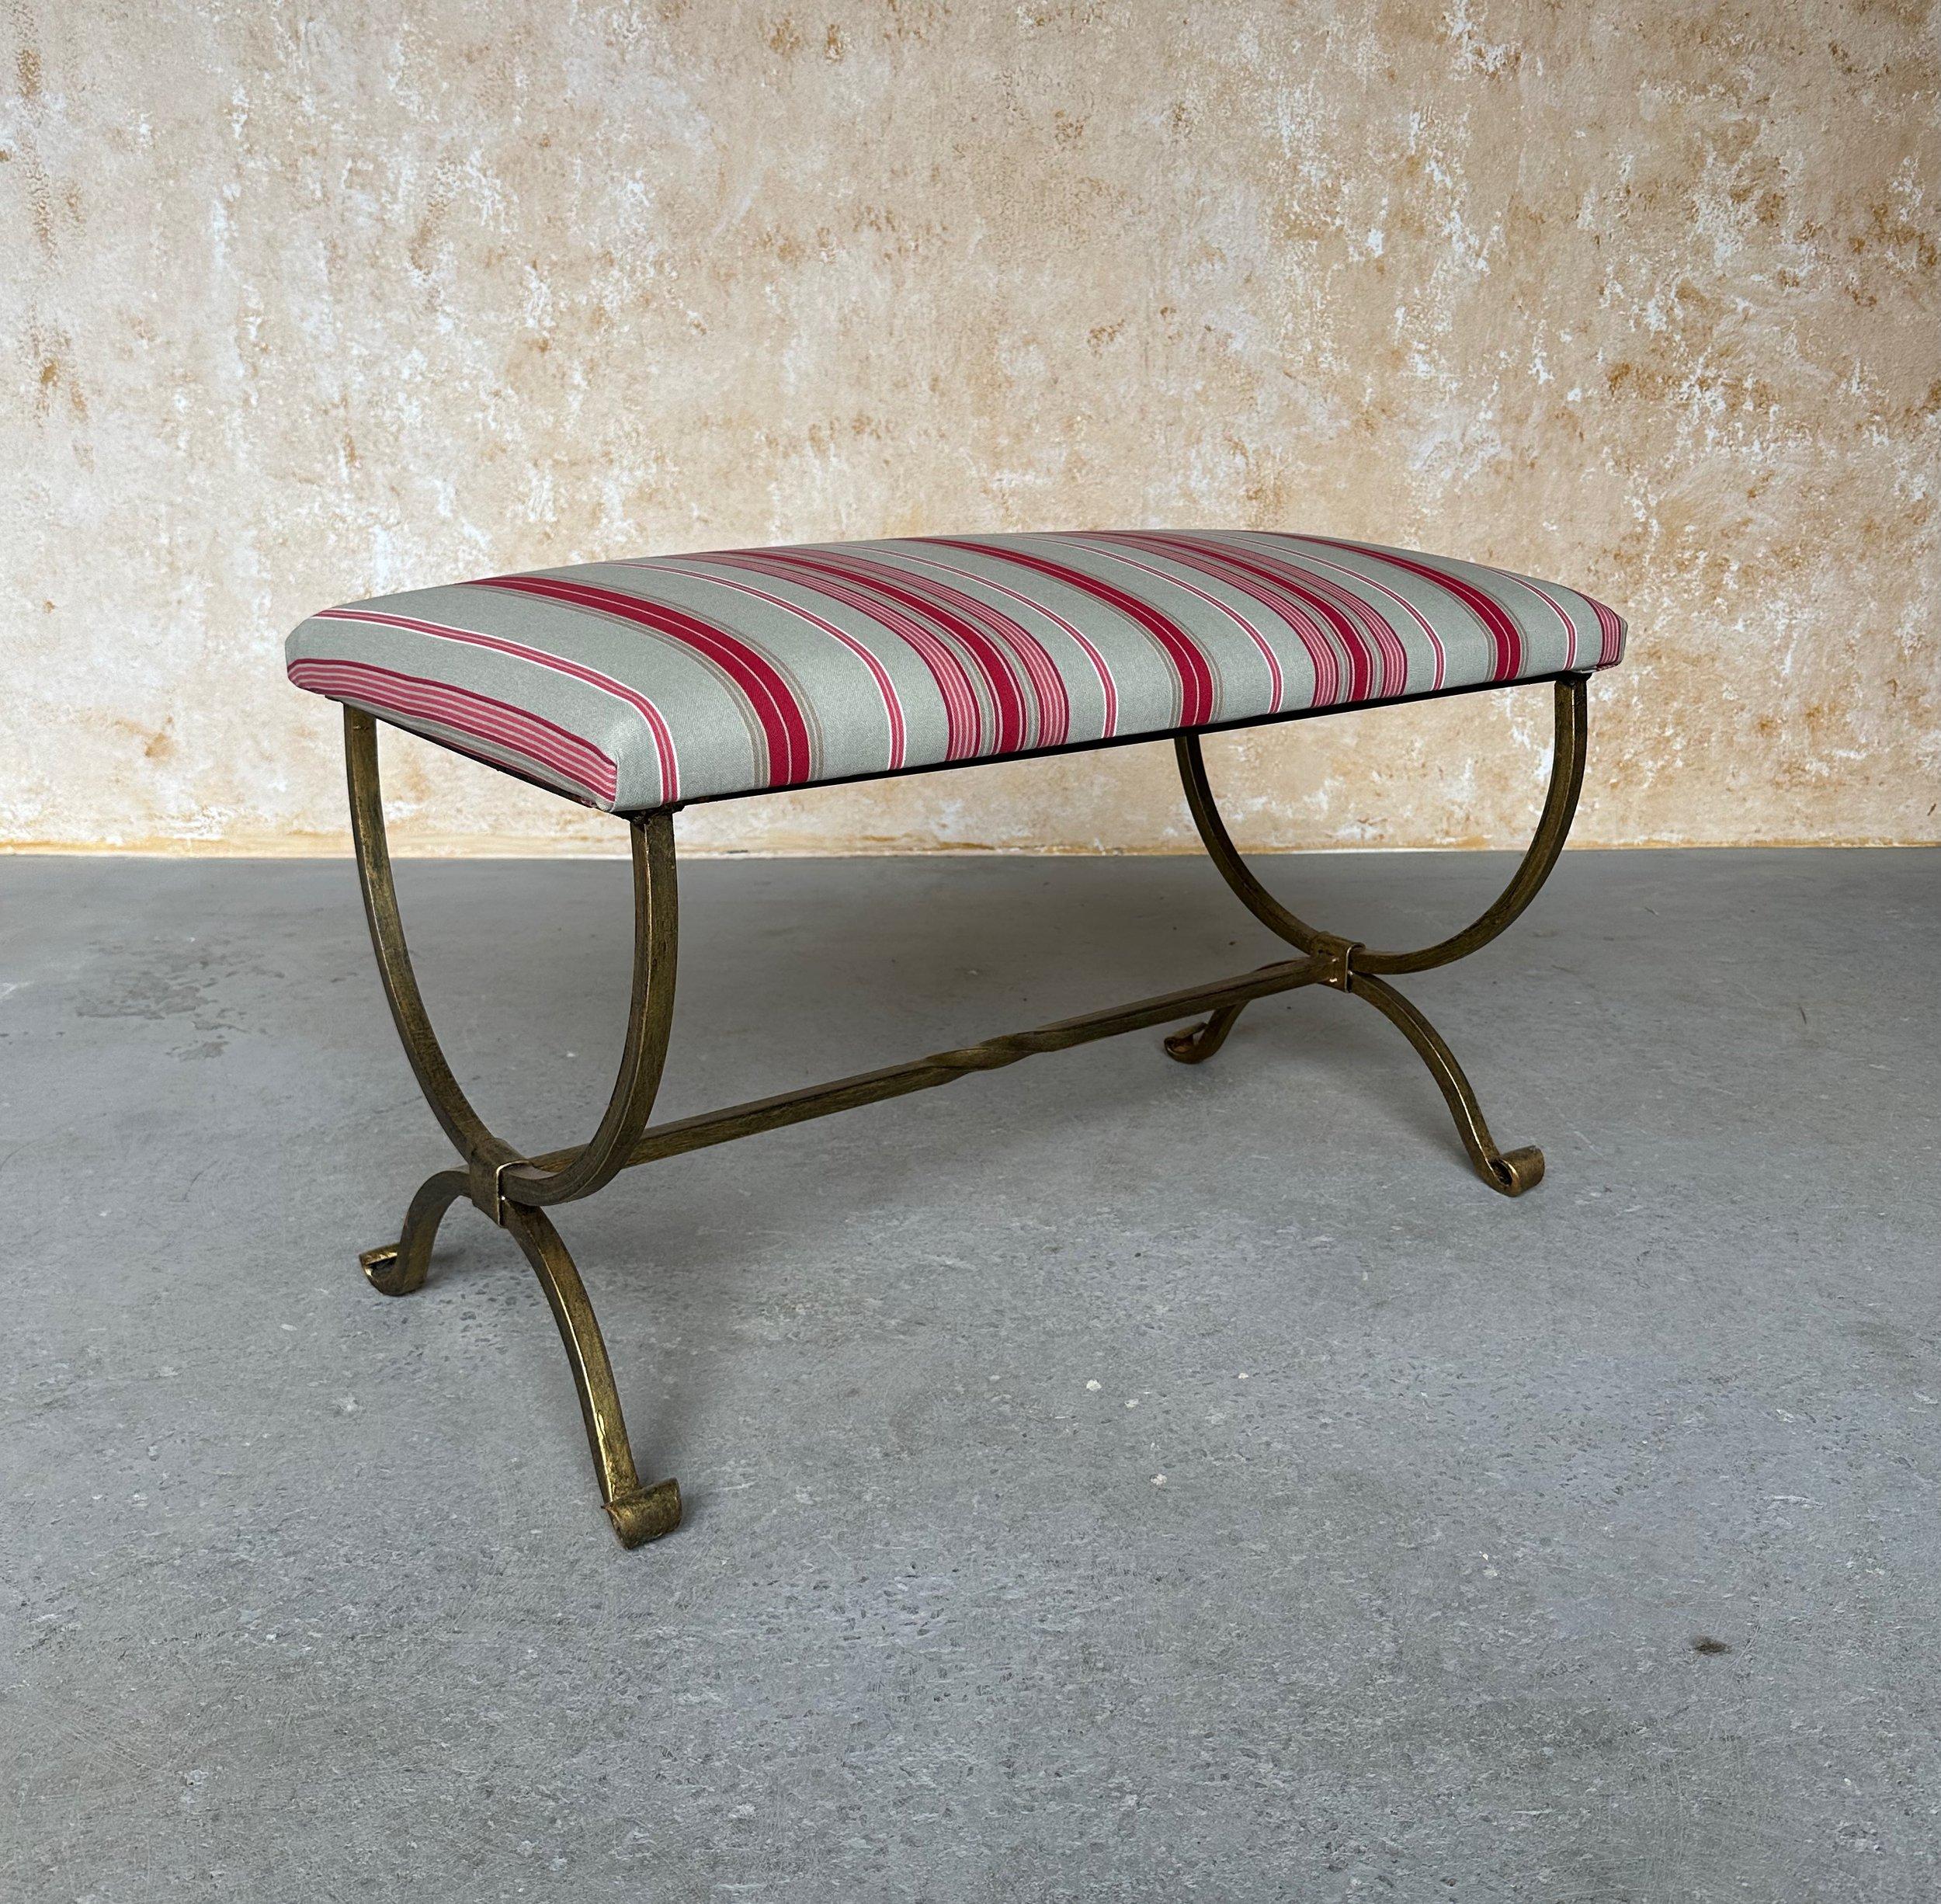 This beautiful Spanish gilt iron bench was recently made by skilled European artisans and features gracefully scrolled legs and a stretcher with a decorative center twist. Handmade by expert craftsmen, it has a hand forged iron base with a rich but